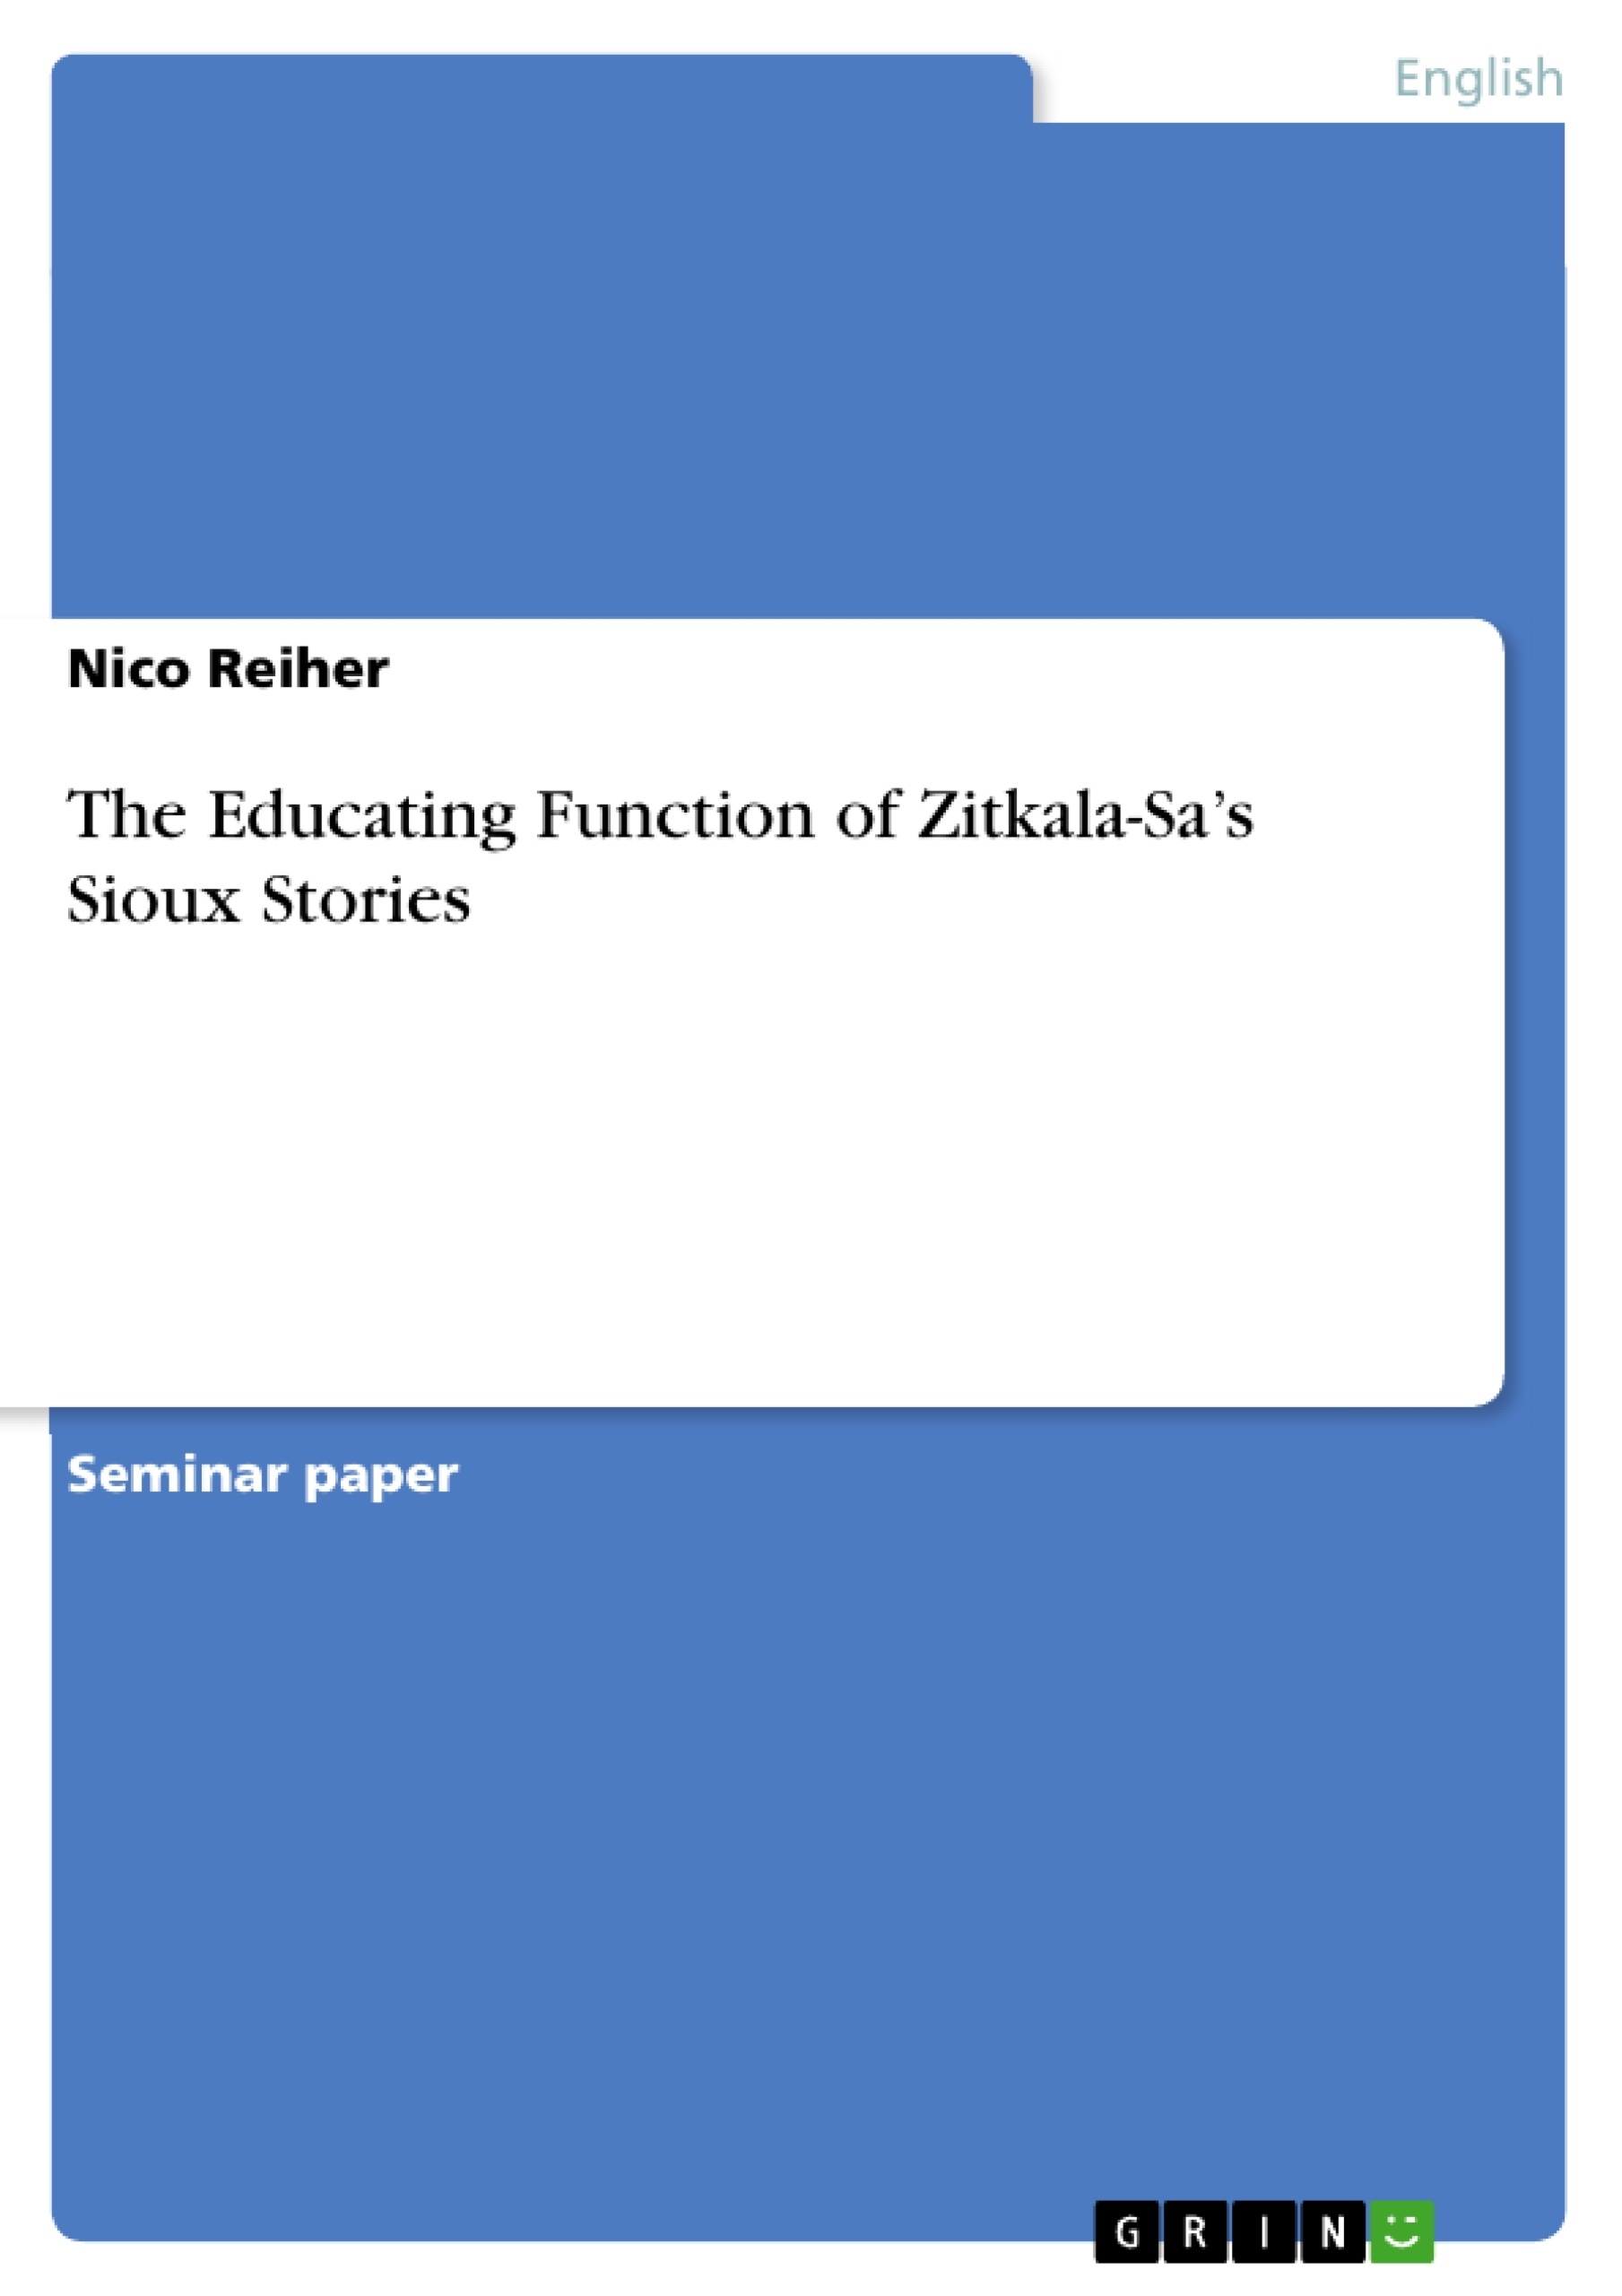 Titel: The Educating Function of Zitkala-Sa’s Sioux Stories